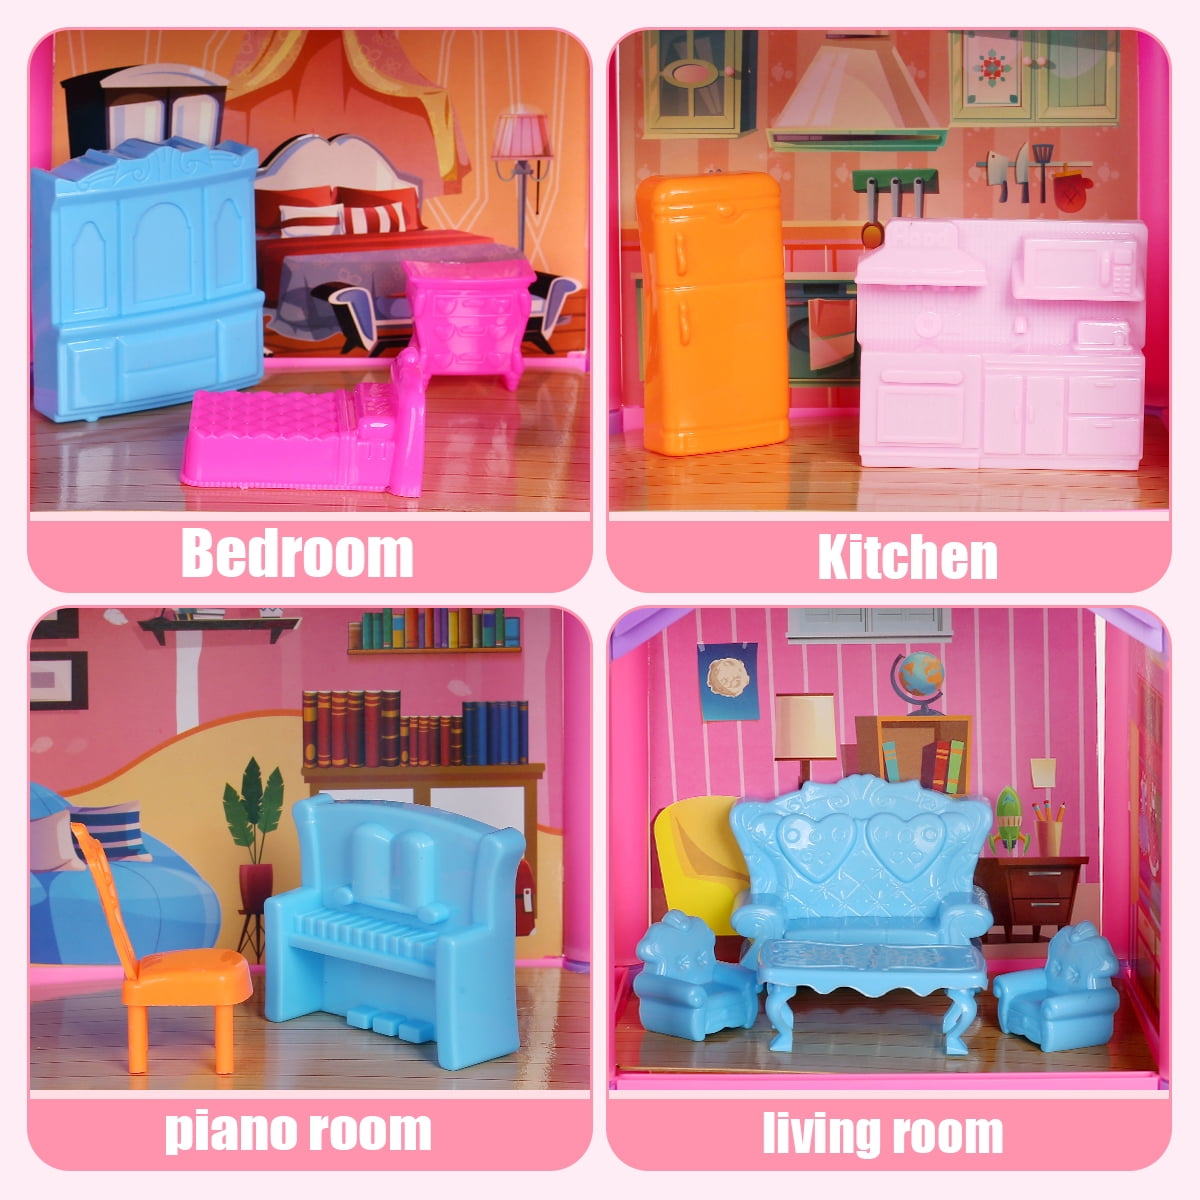 JoyStone Play Dollhouse with Doll Toy Figures and 14 Rooms Furniture and  Accessories Creative Dollhouse Gift for Girls Toddler and Kids Ages 3+ Pink